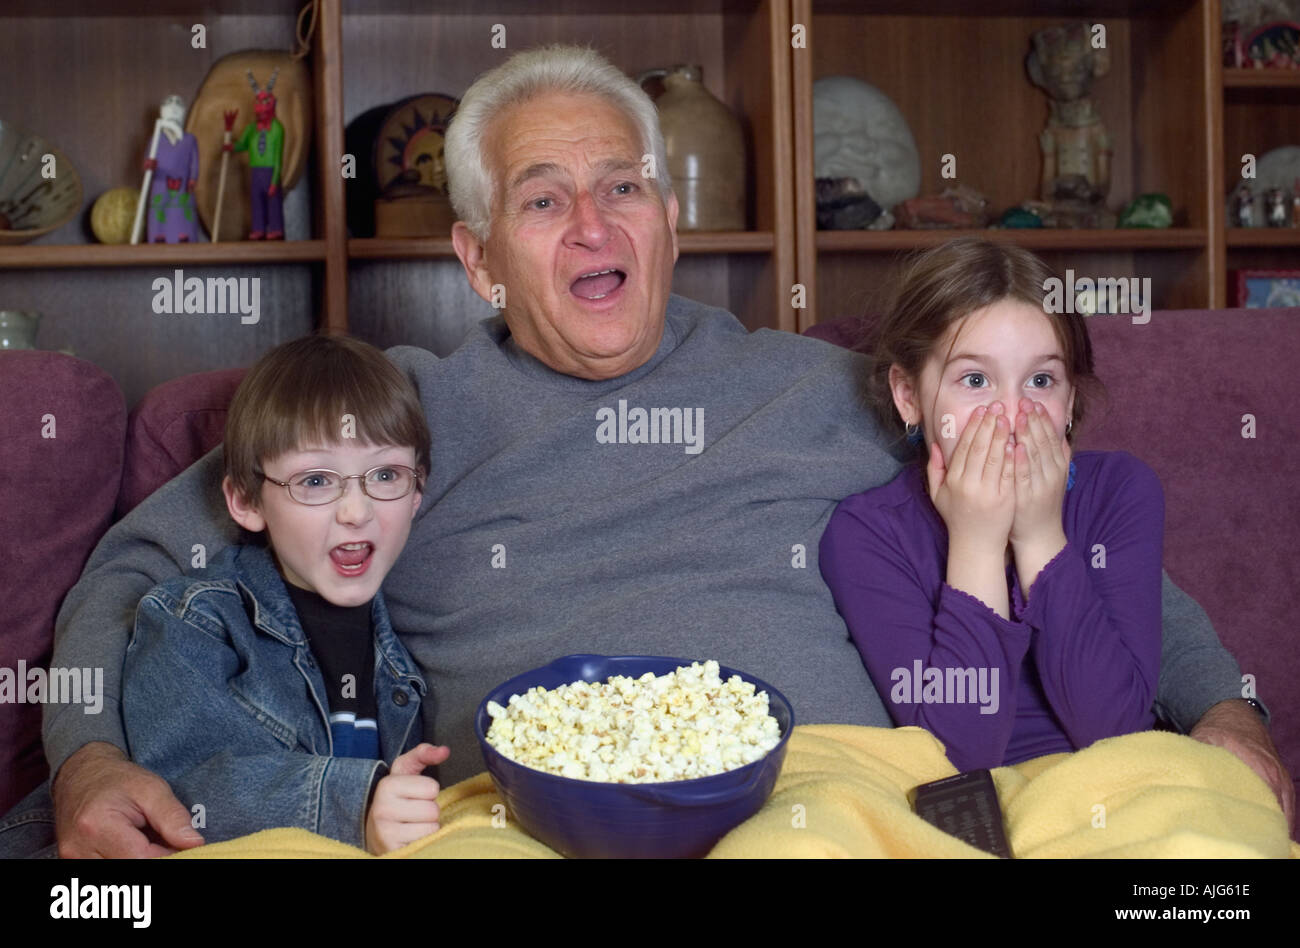 Grandfather and grandchildren watching scary movie on television eating popcorn Stock Photo